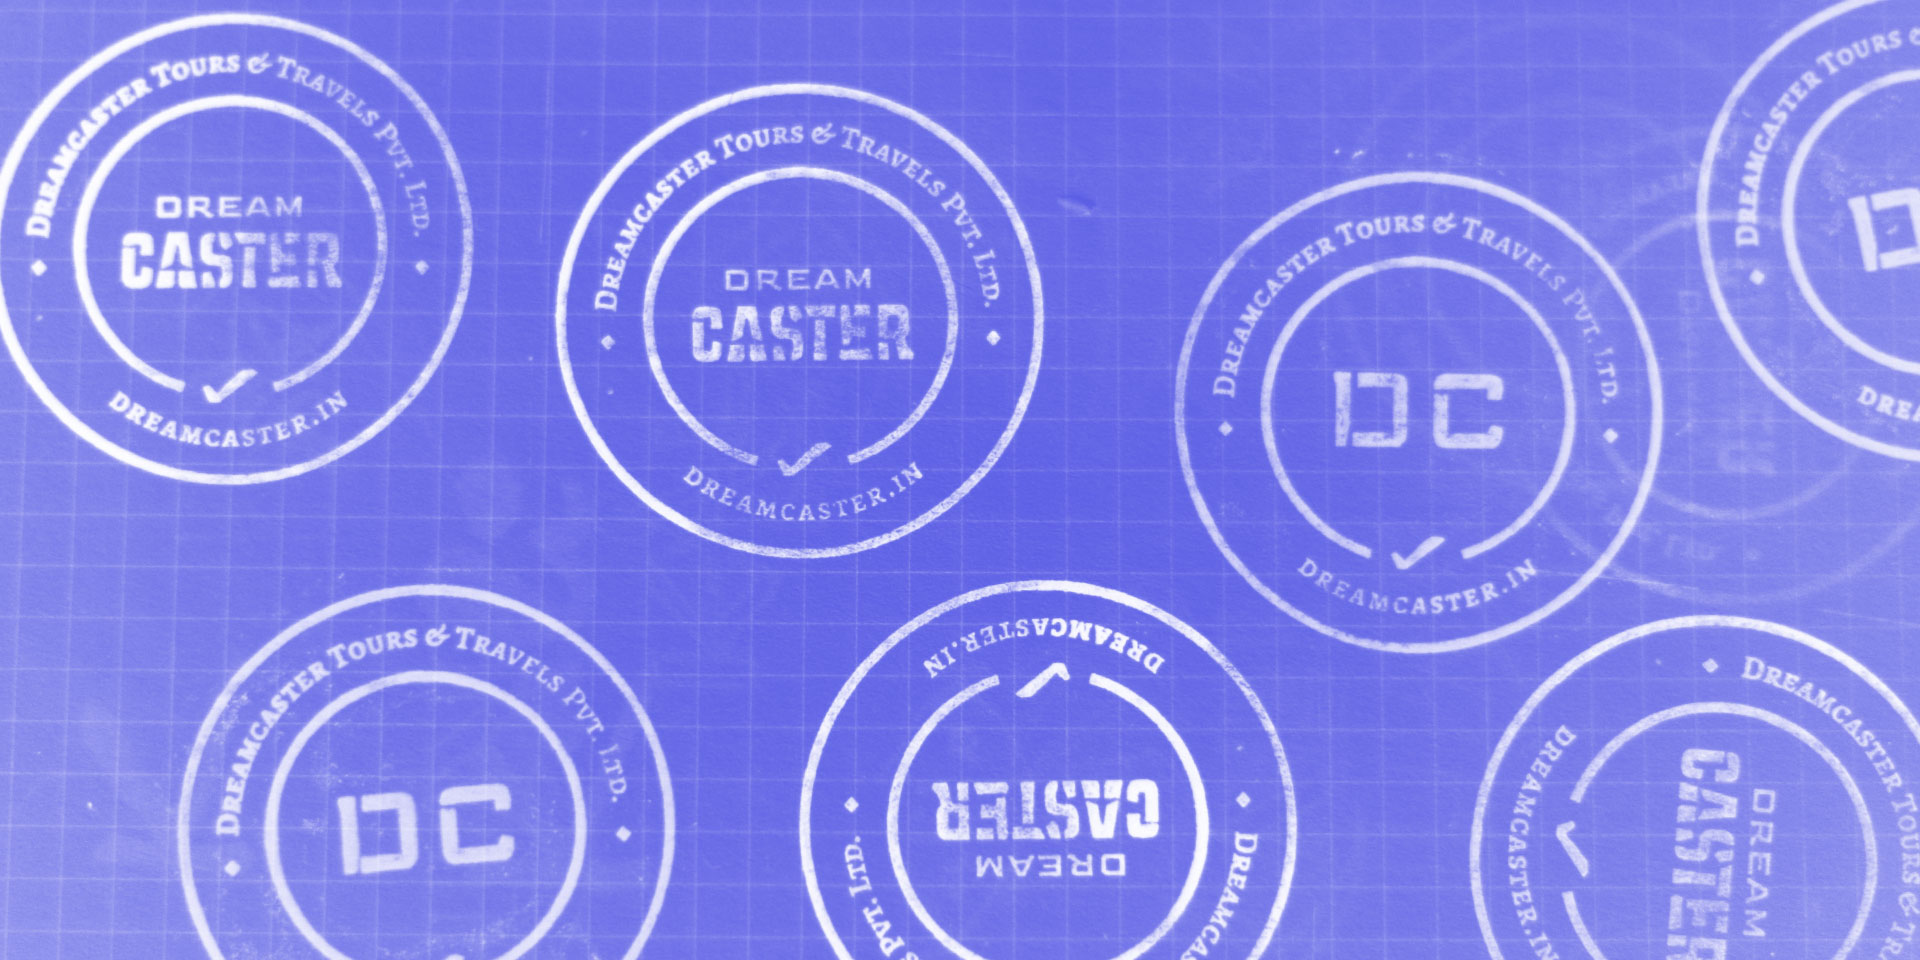 Dream Caster Tours and Travels - Branding - Stamps Printed2